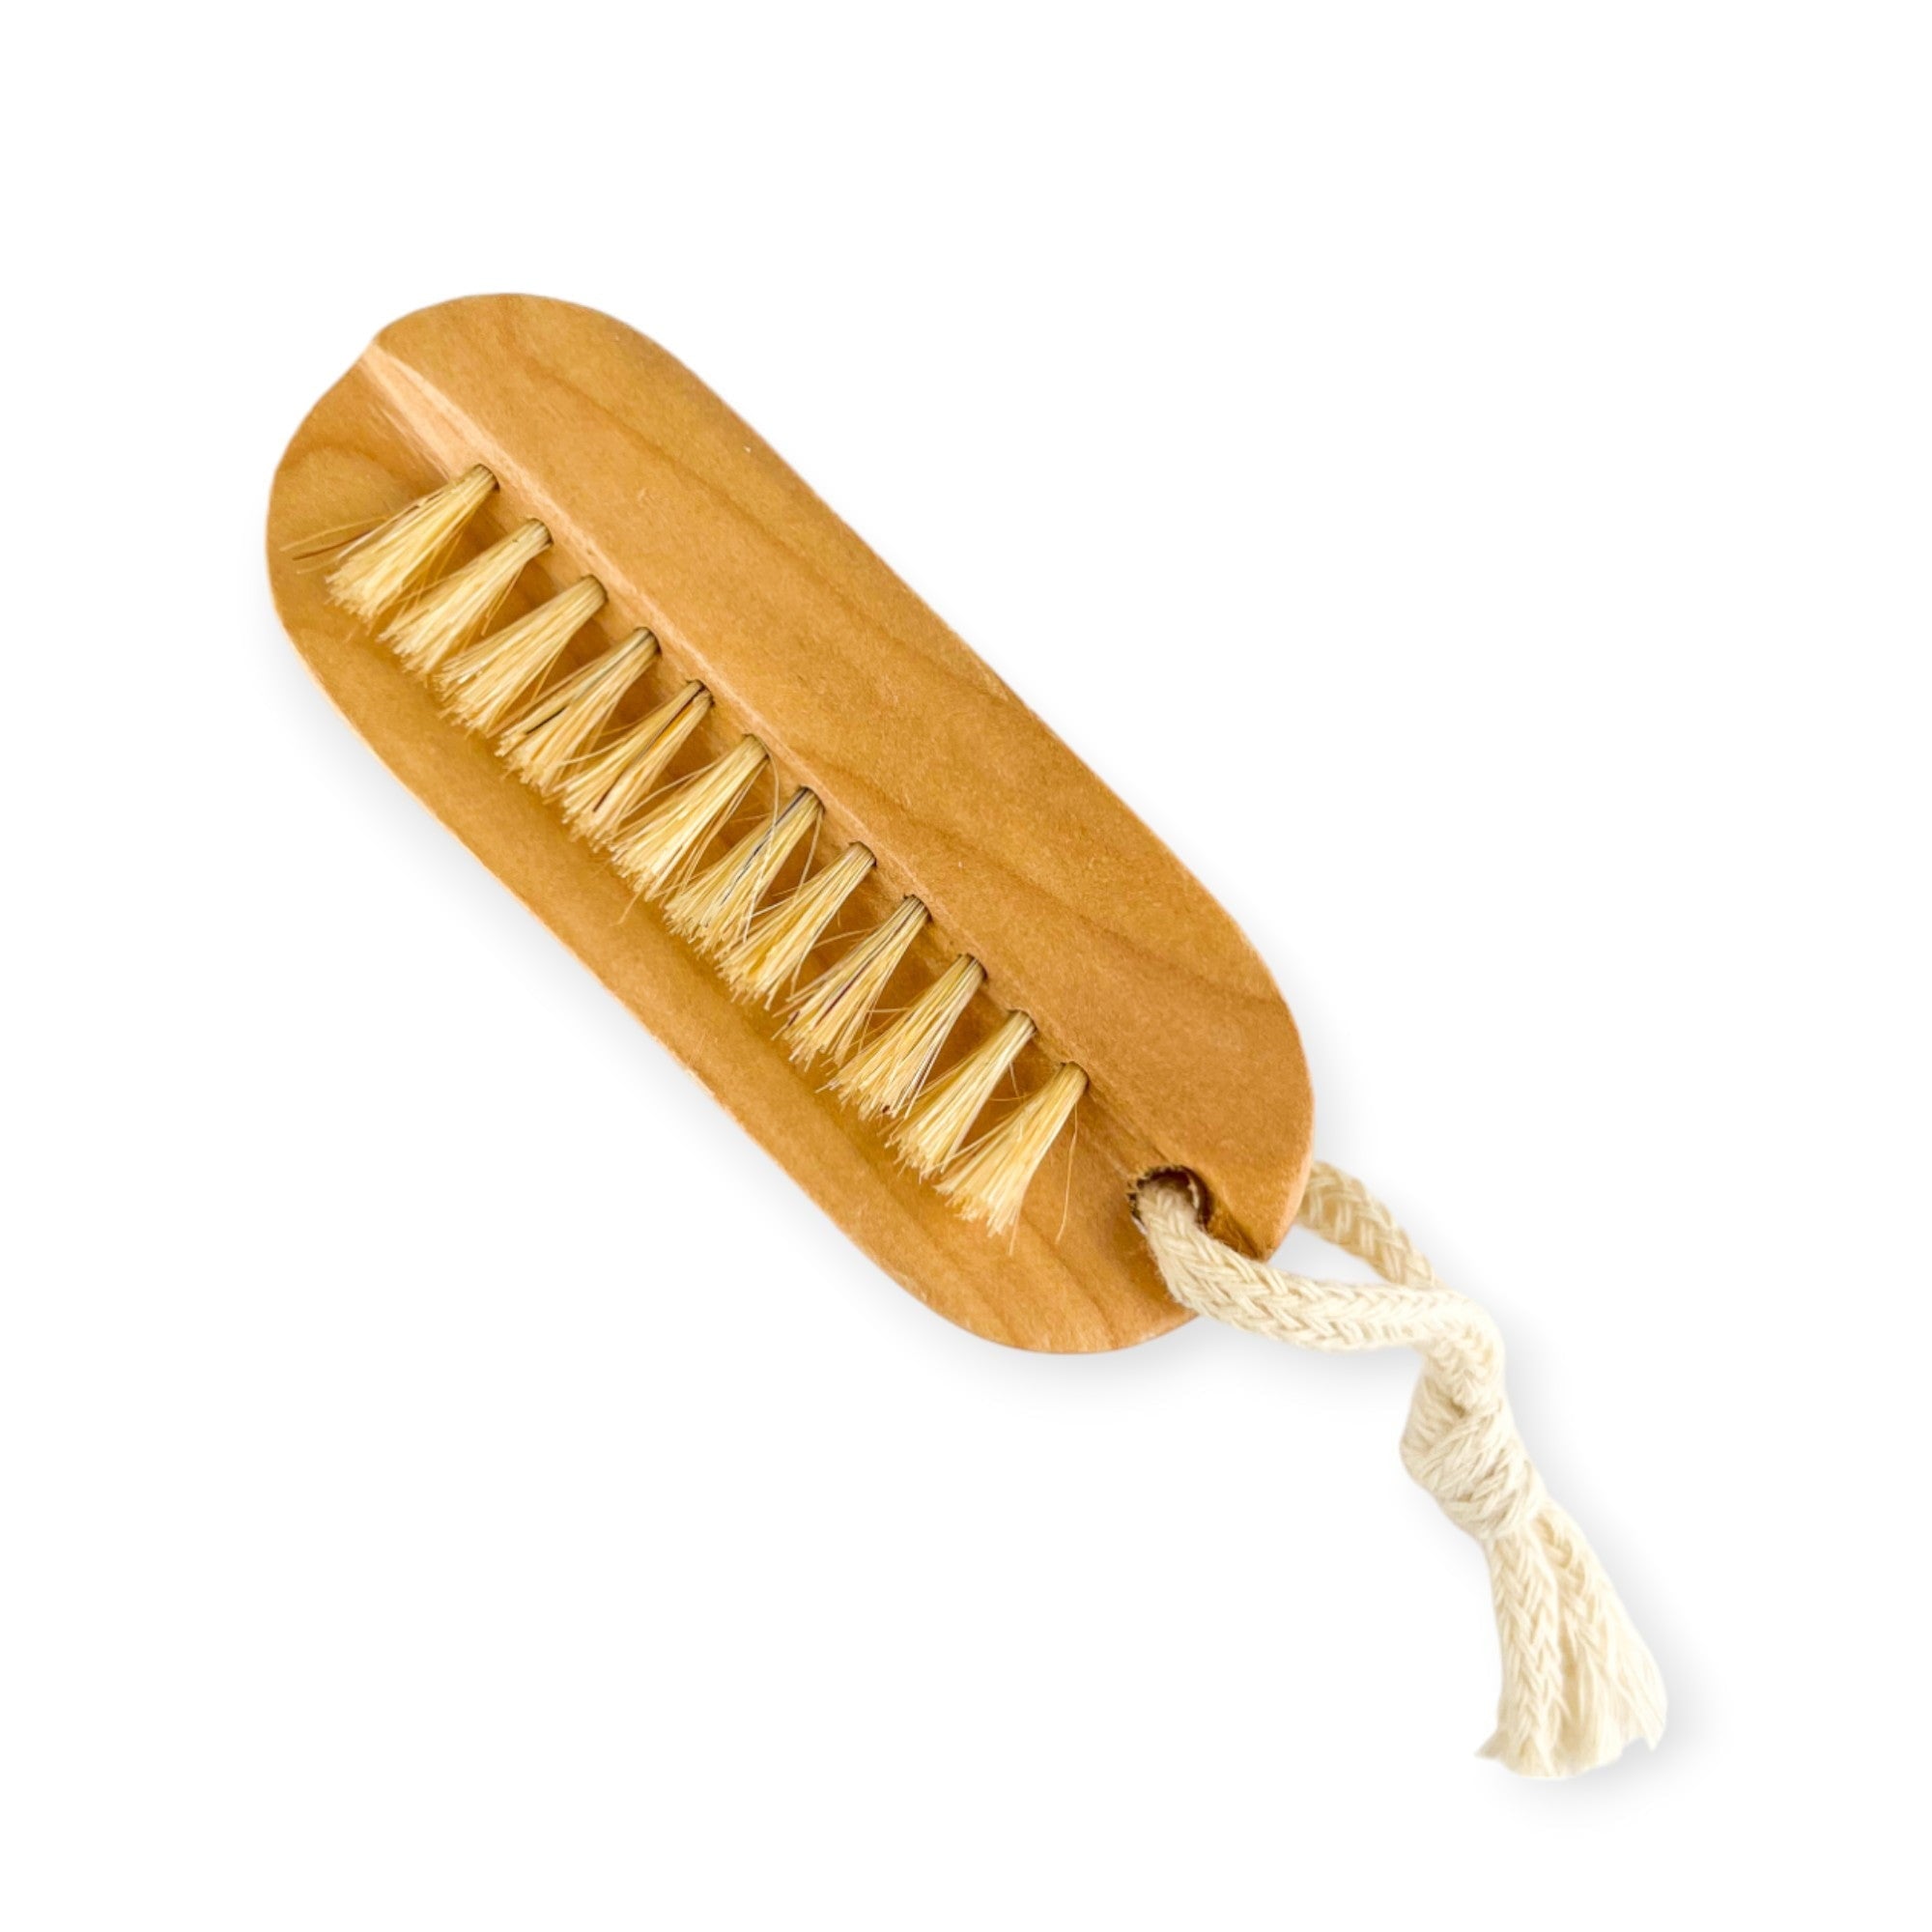 Wooden Nail Brush - Old Town Soap Co.